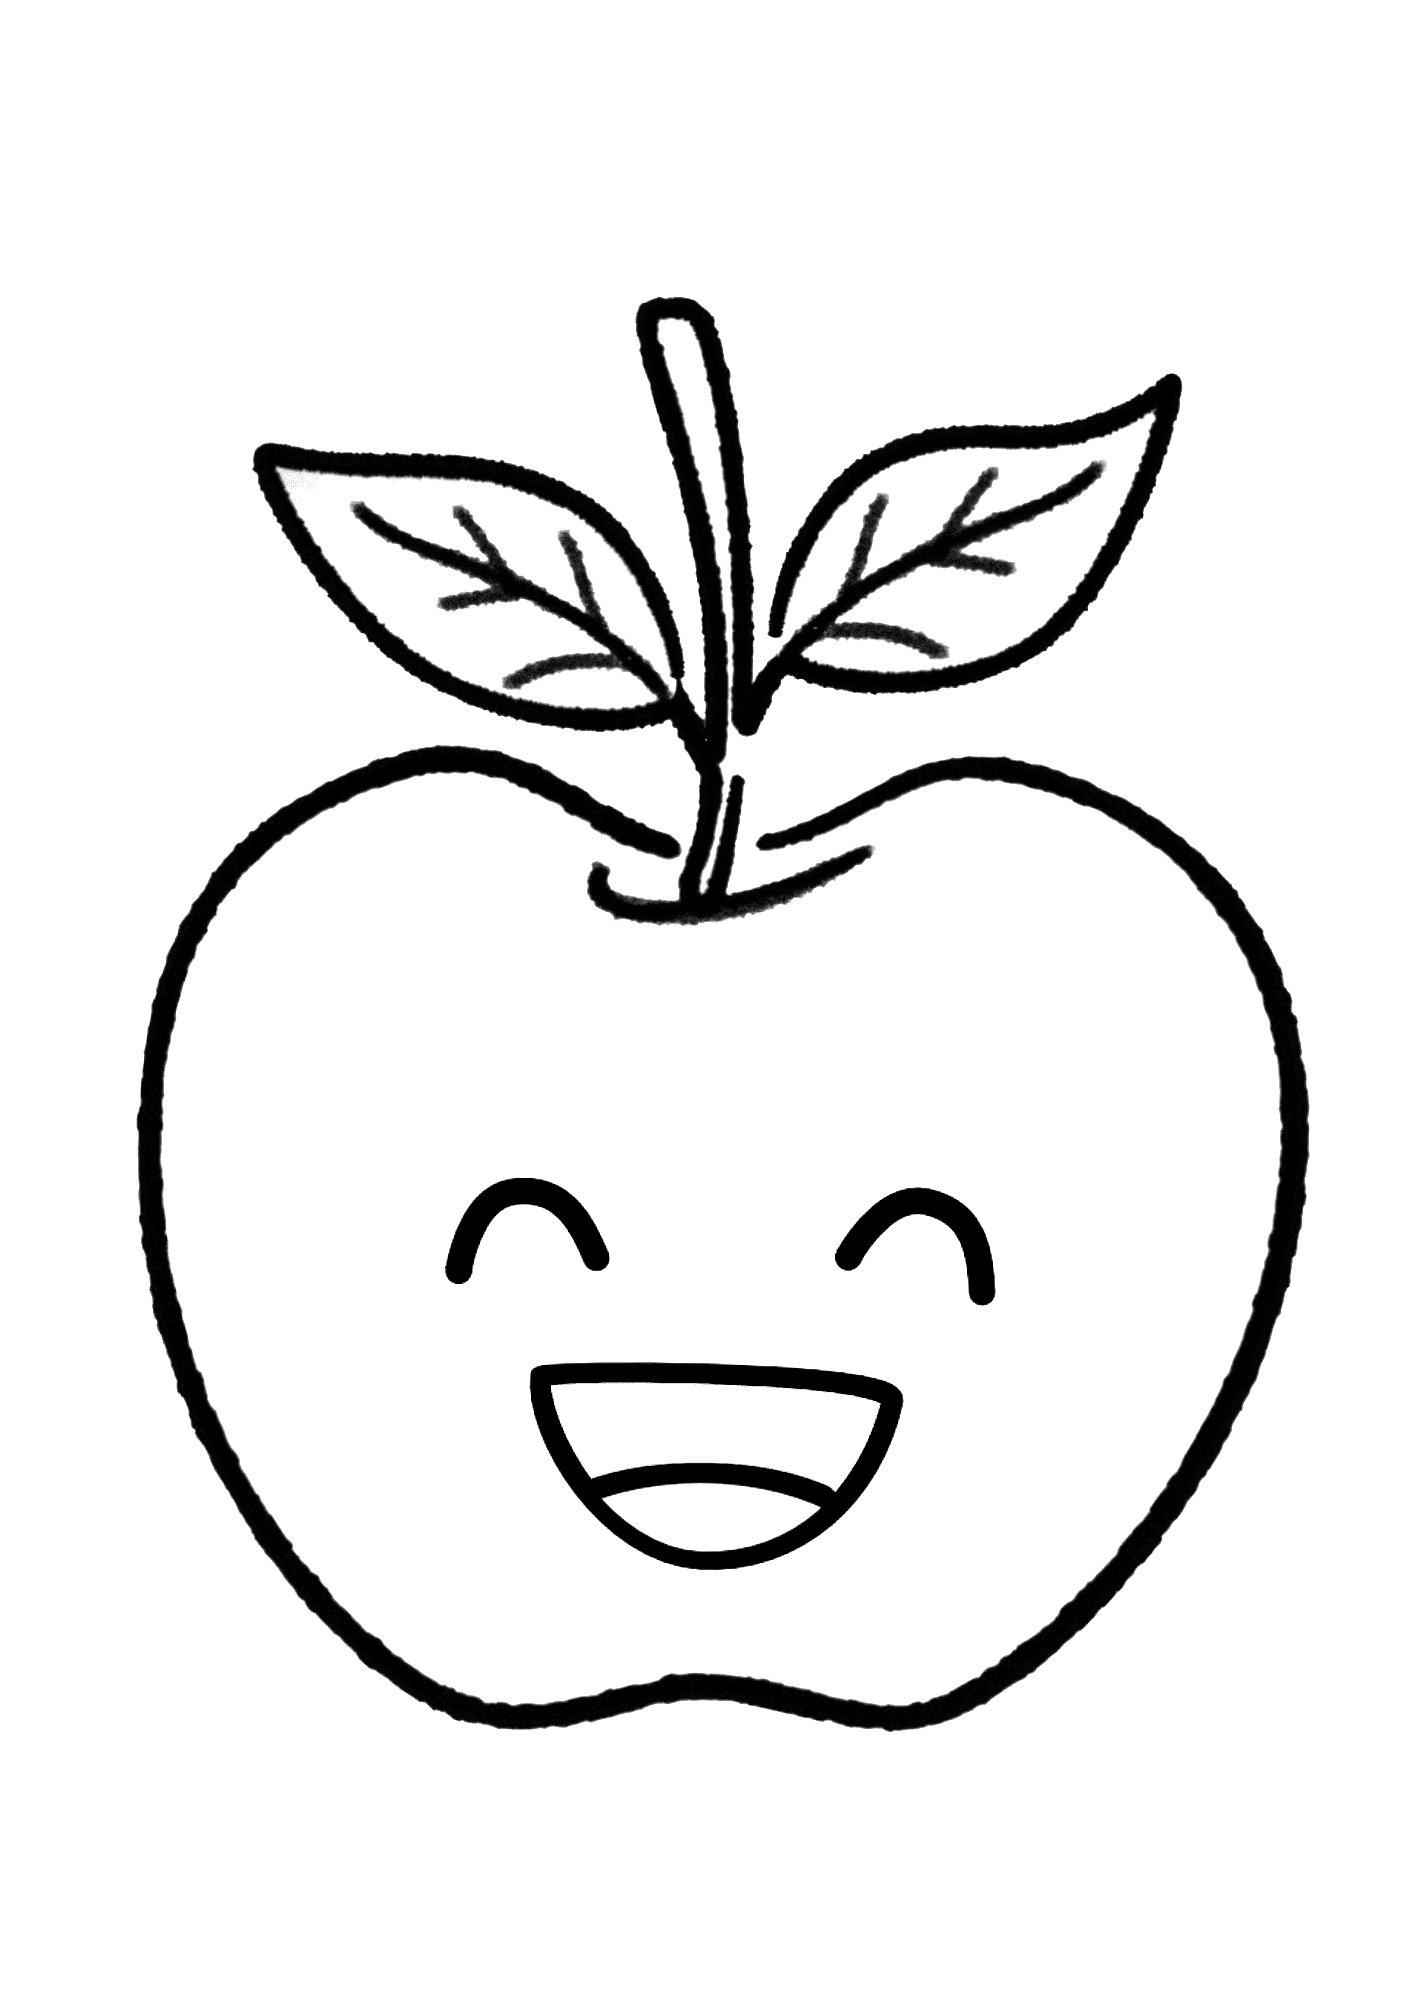 Lovely Apple Emoji Coloring Page